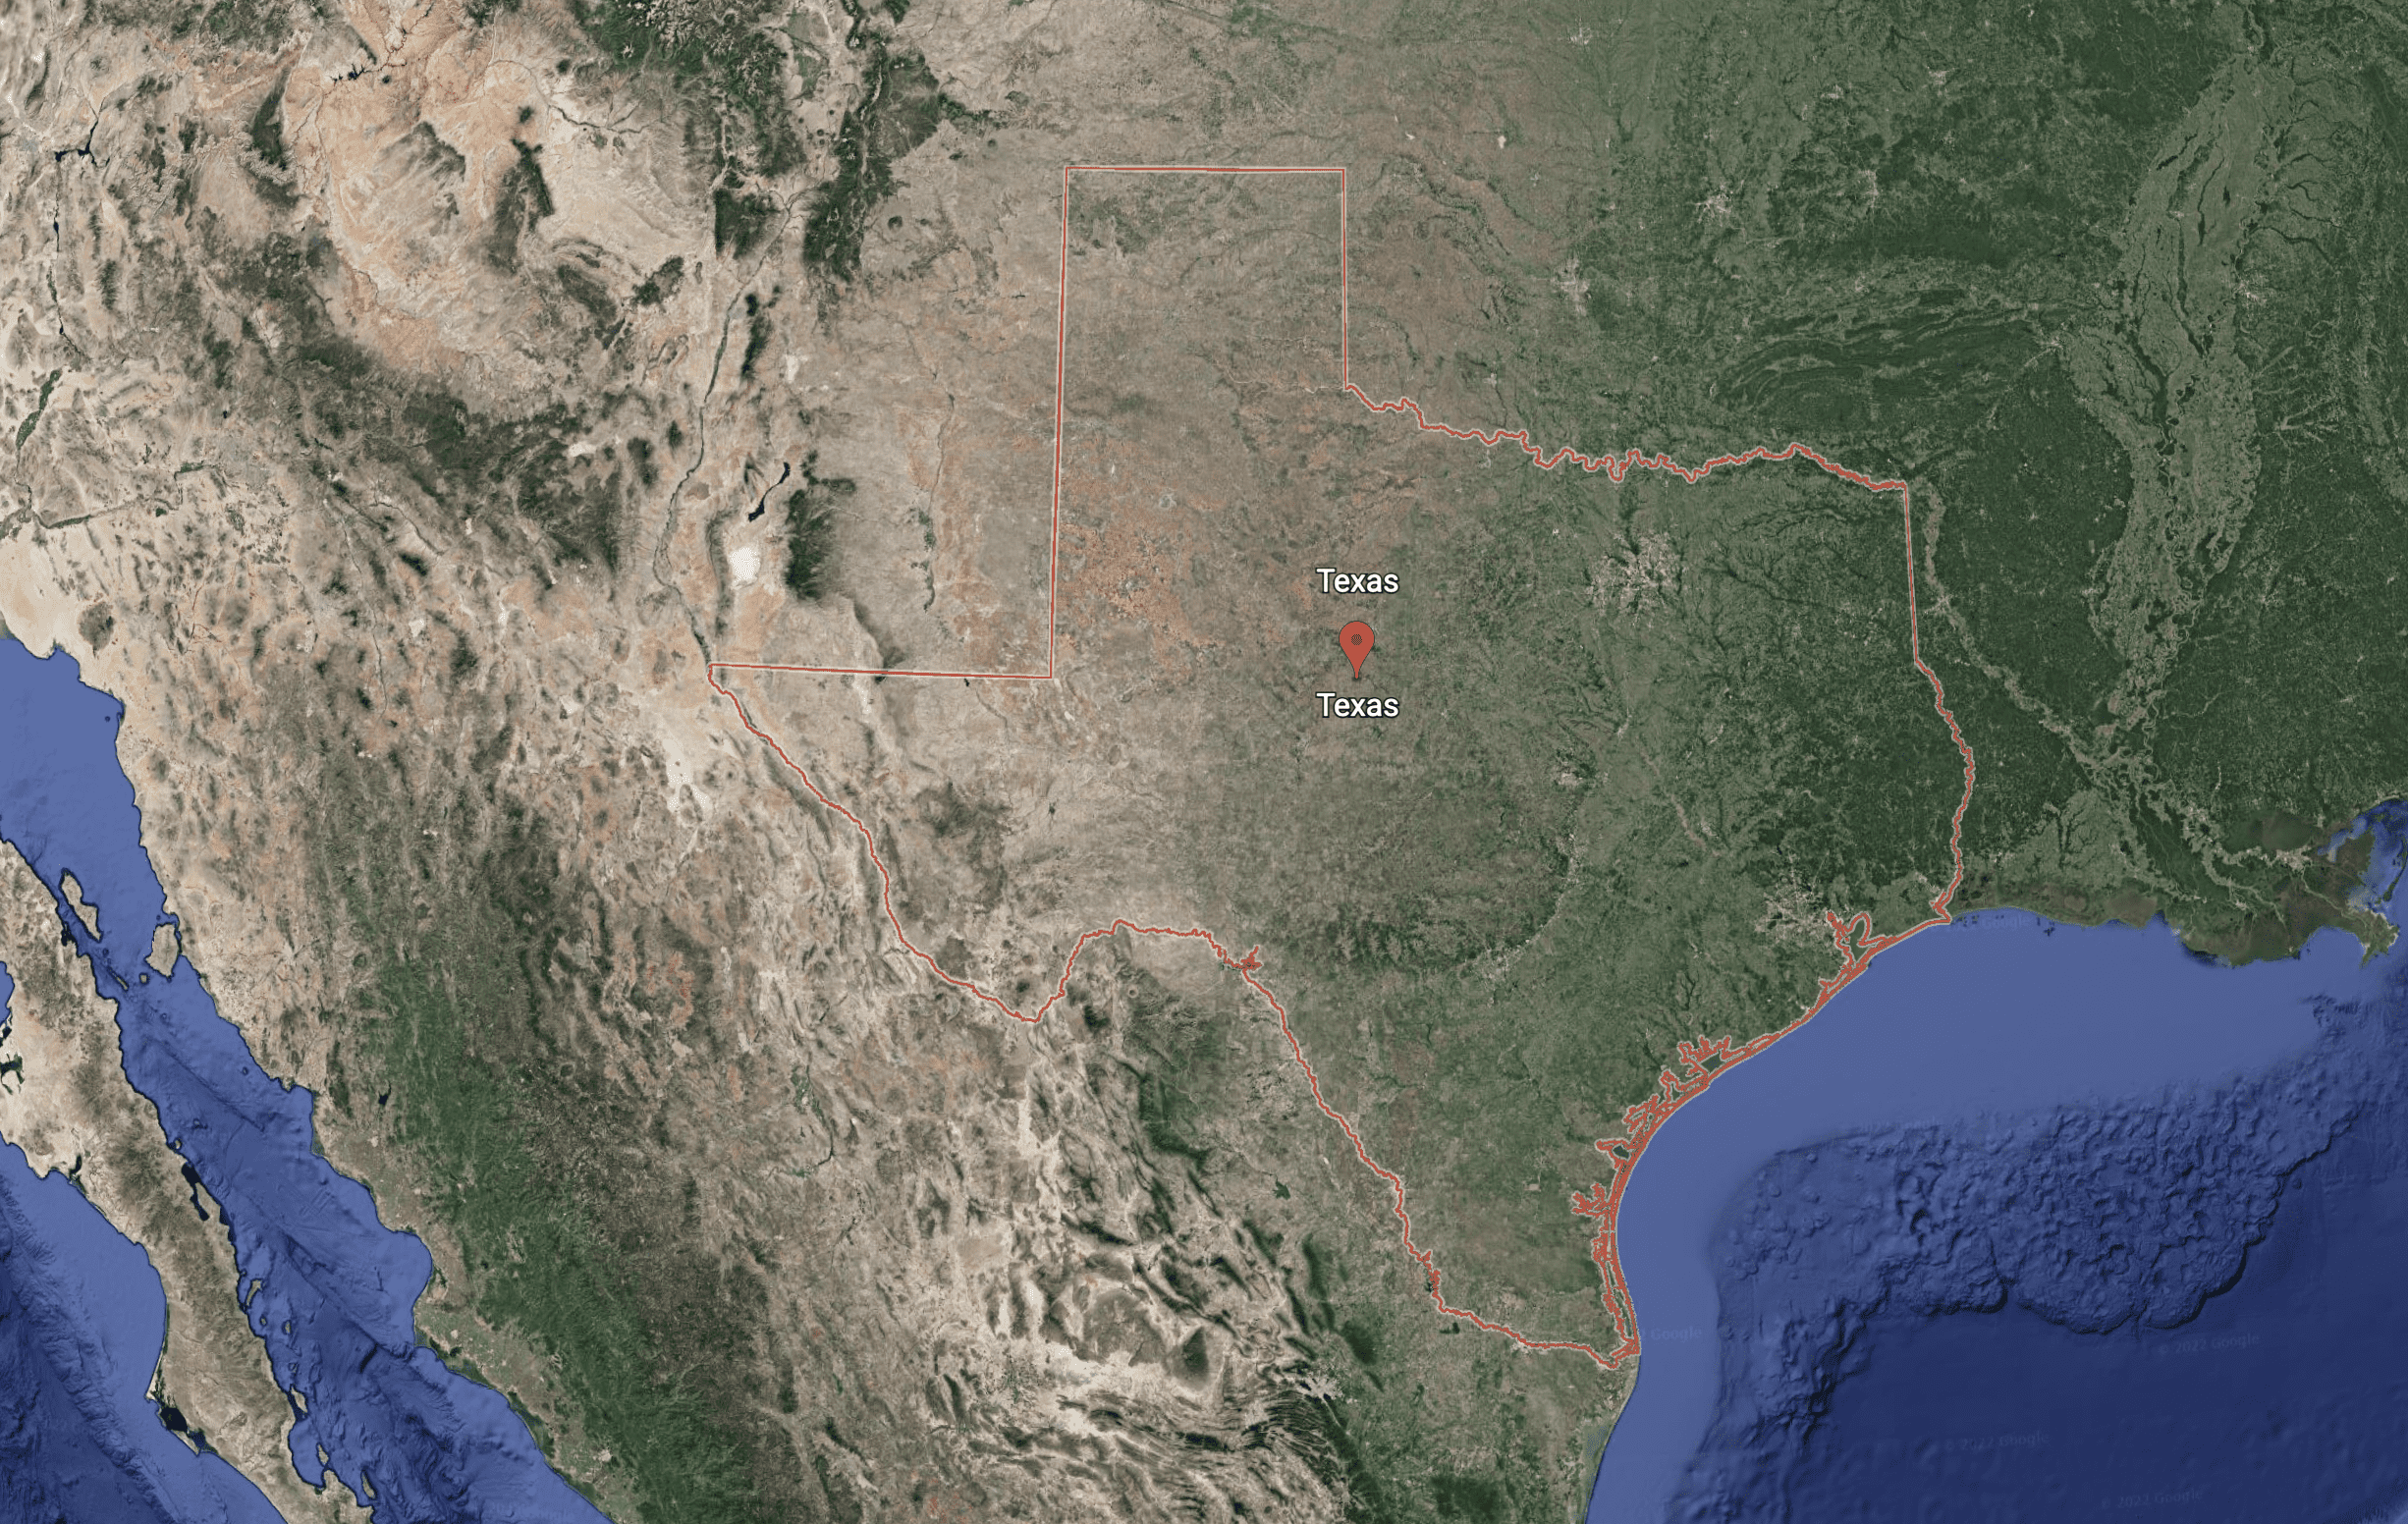 Satellite overhead image of Texas from Google Earth 2022